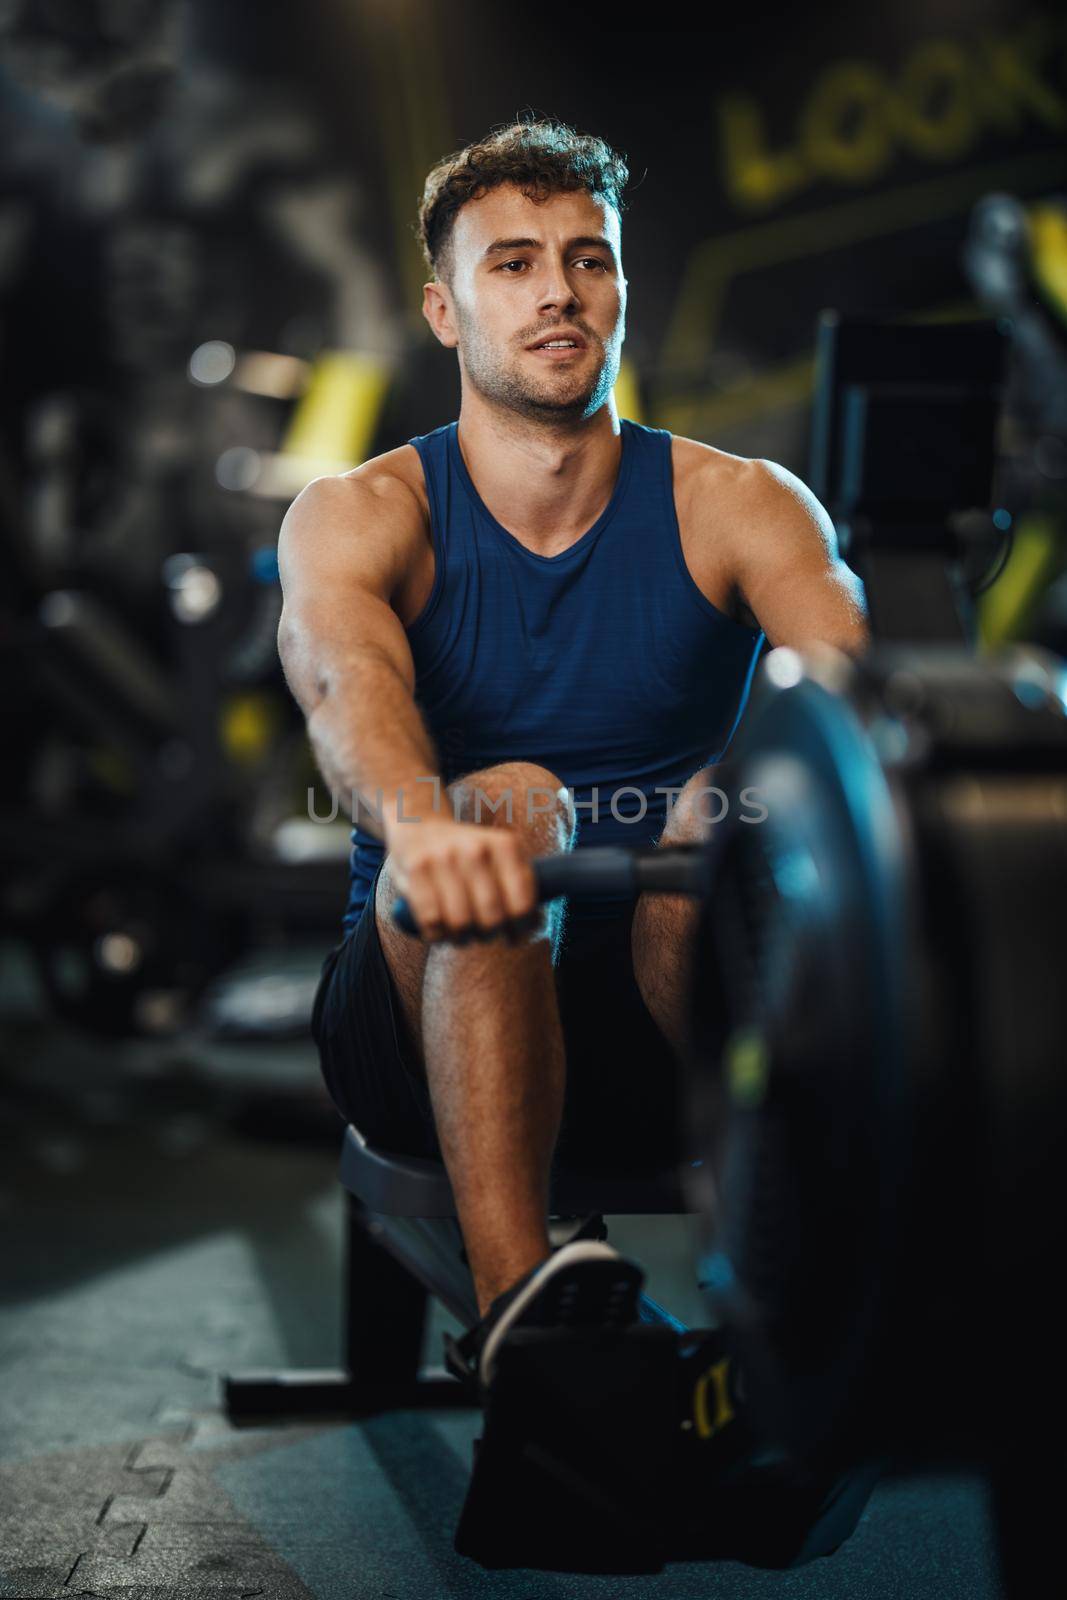 A young muscular man is pulling the row machine on crossfit training in the gym.